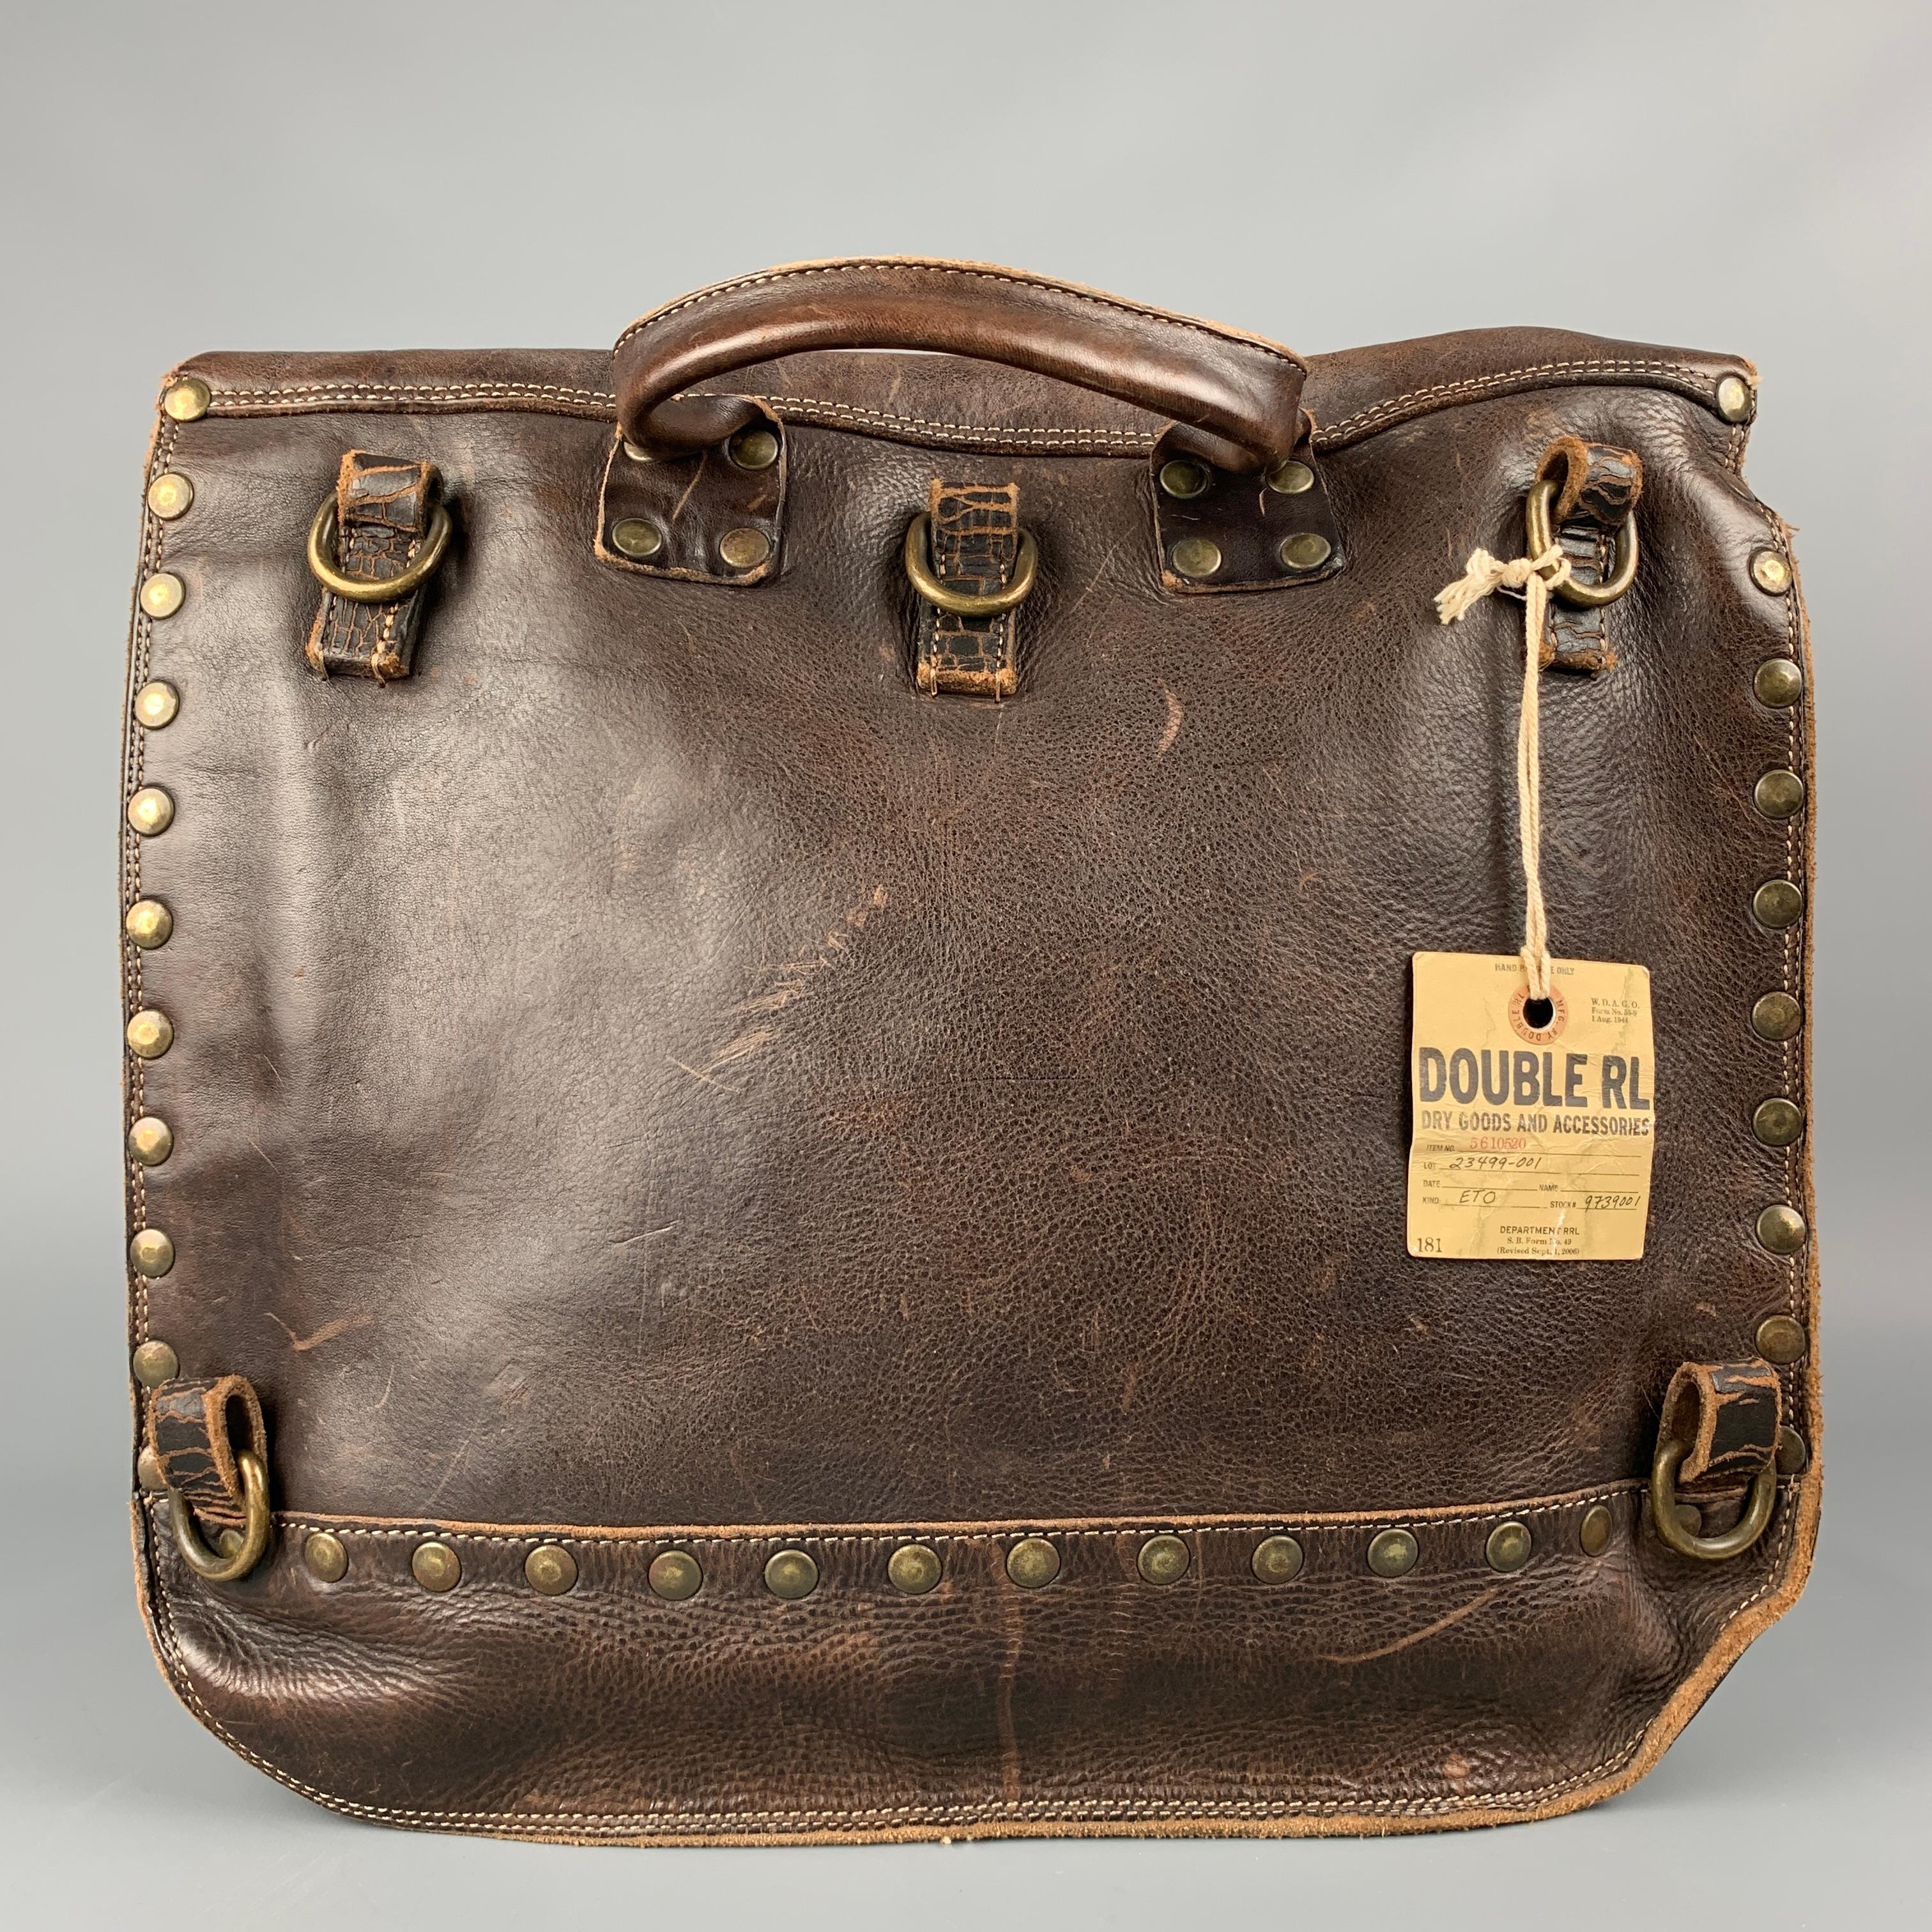 RRL by RALPH LAUREN Limited Edition bag comes in a brown distressed leather featuring studded details, top handle, inner compartment, and a double buckle strap closure. 

New With Tags. 

Measurements:

Length: 13.5 in.
Width: 4 in.
Height: 12